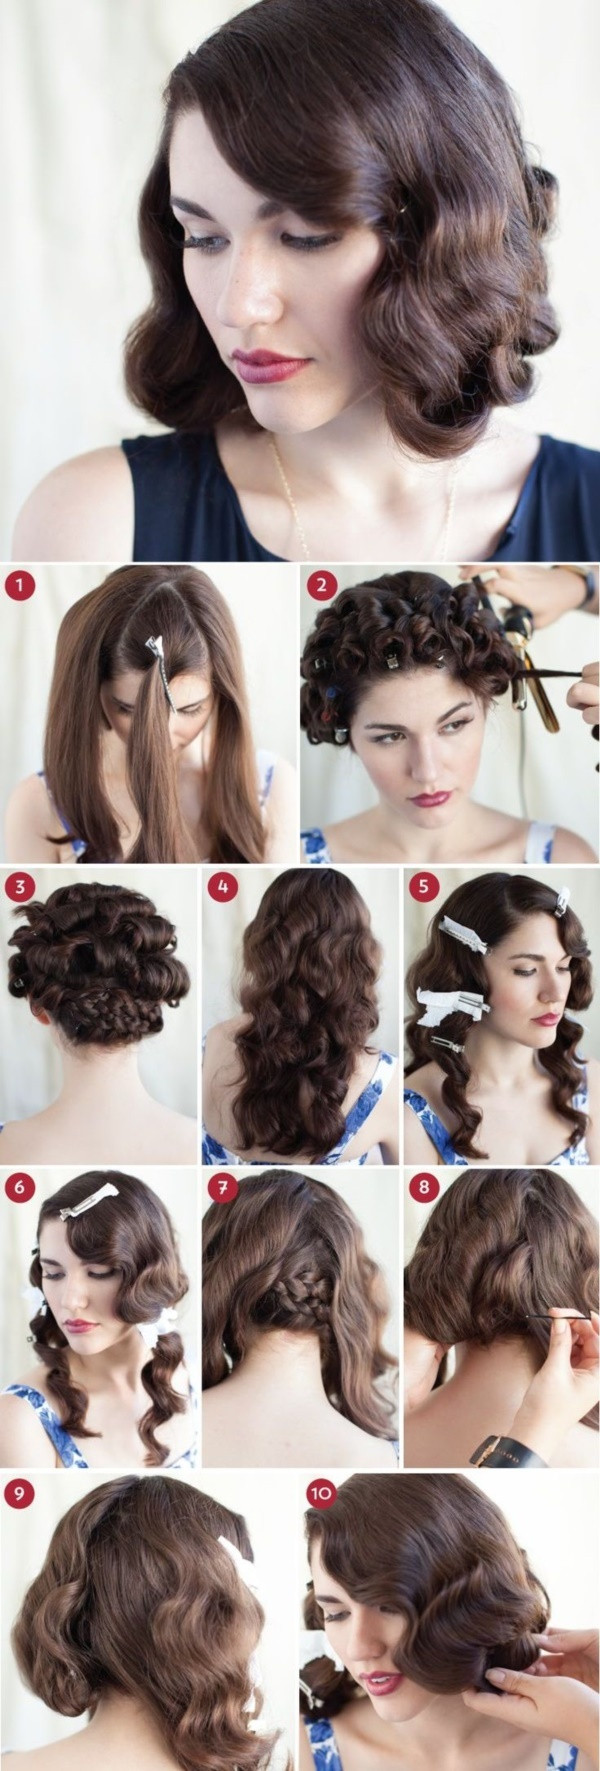 Diy Hairstyles For Long Hair
 101 Easy DIY Hairstyles for Medium and Long Hair to snatch